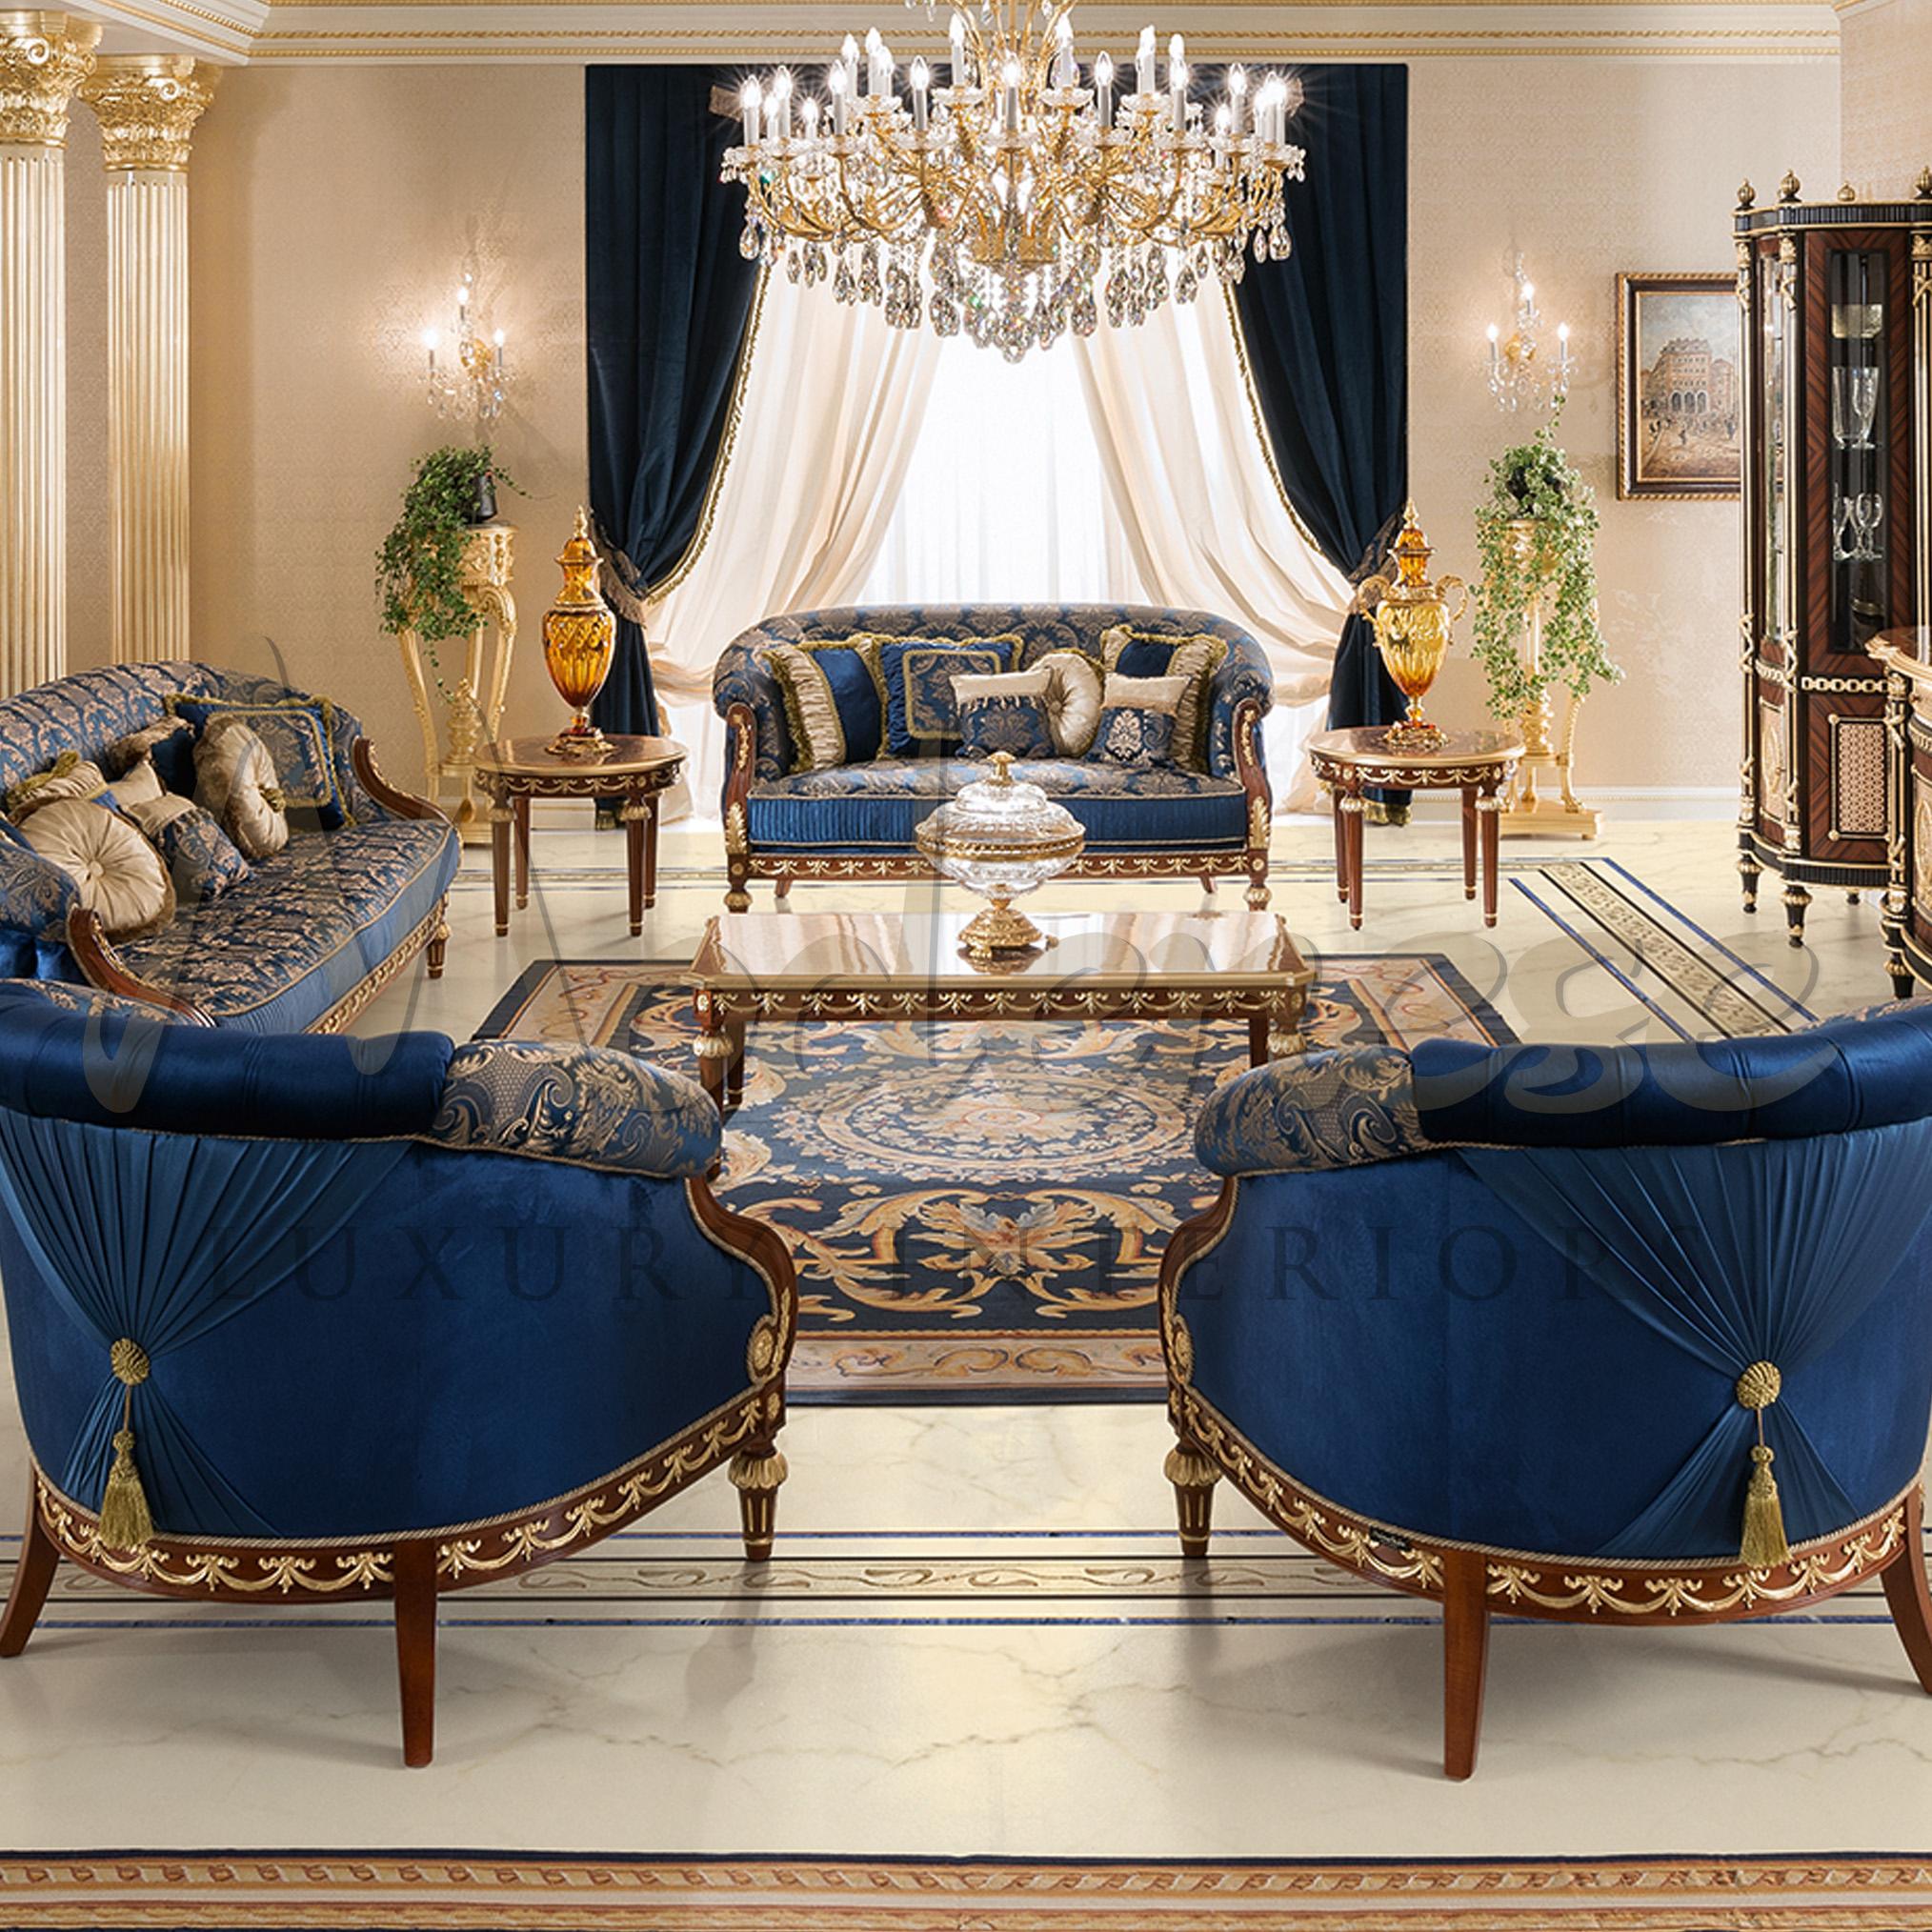 Italian  Royal Neoclassical Sofa in High Quality Cherry Wood and Shiny Gold Leaf Decor For Sale